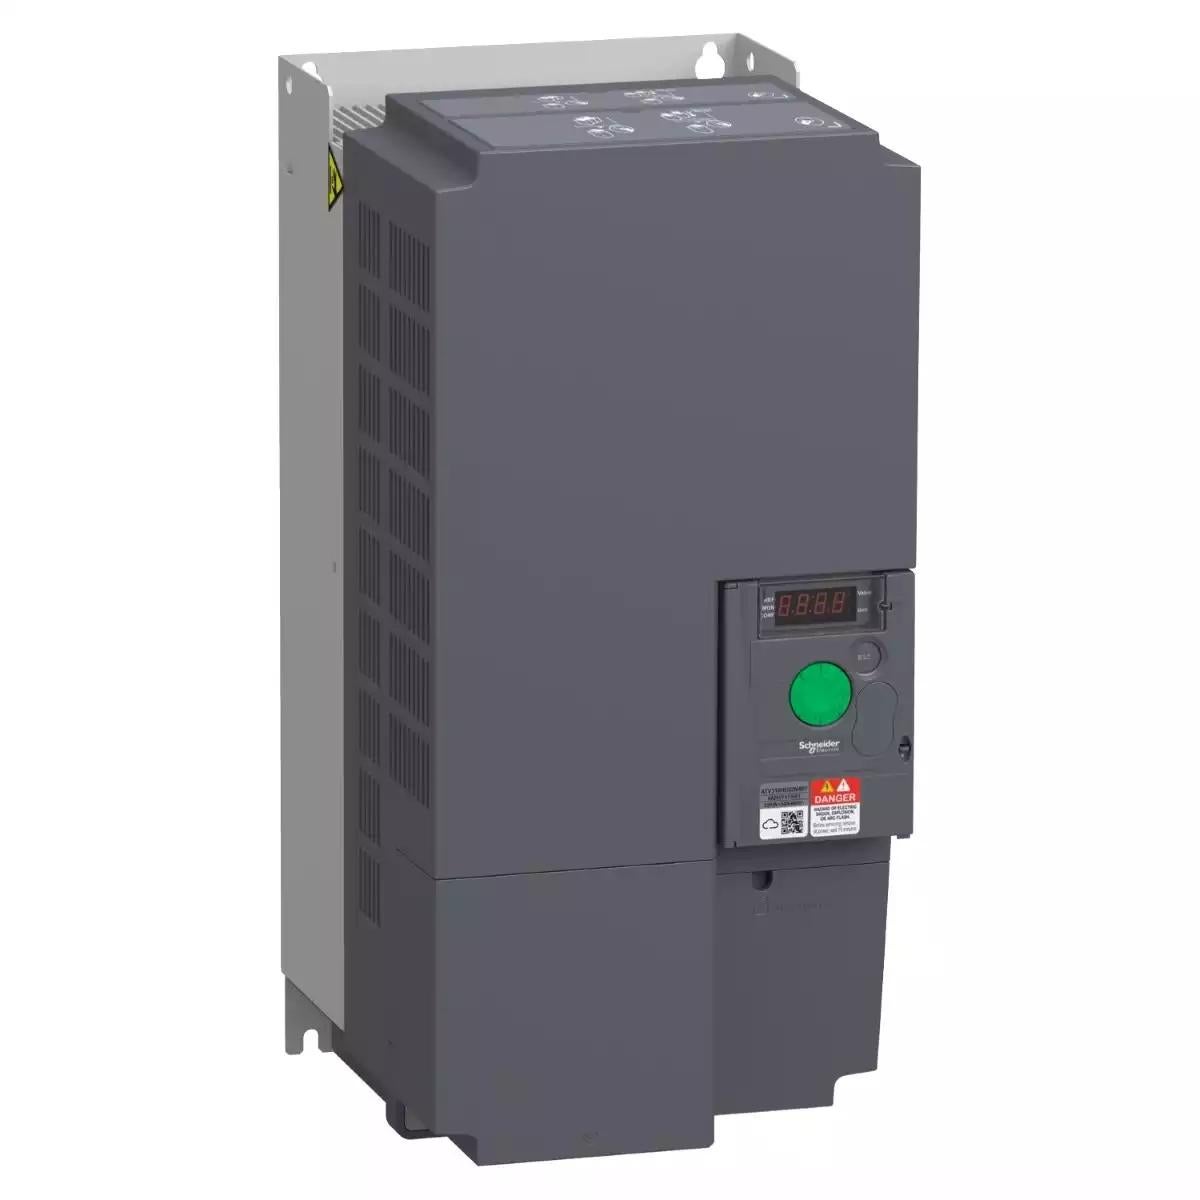 Schneider Electric variable speed drive ATV310, 22 kW, 30 hp, 380...460 V, 3 phase, with filter